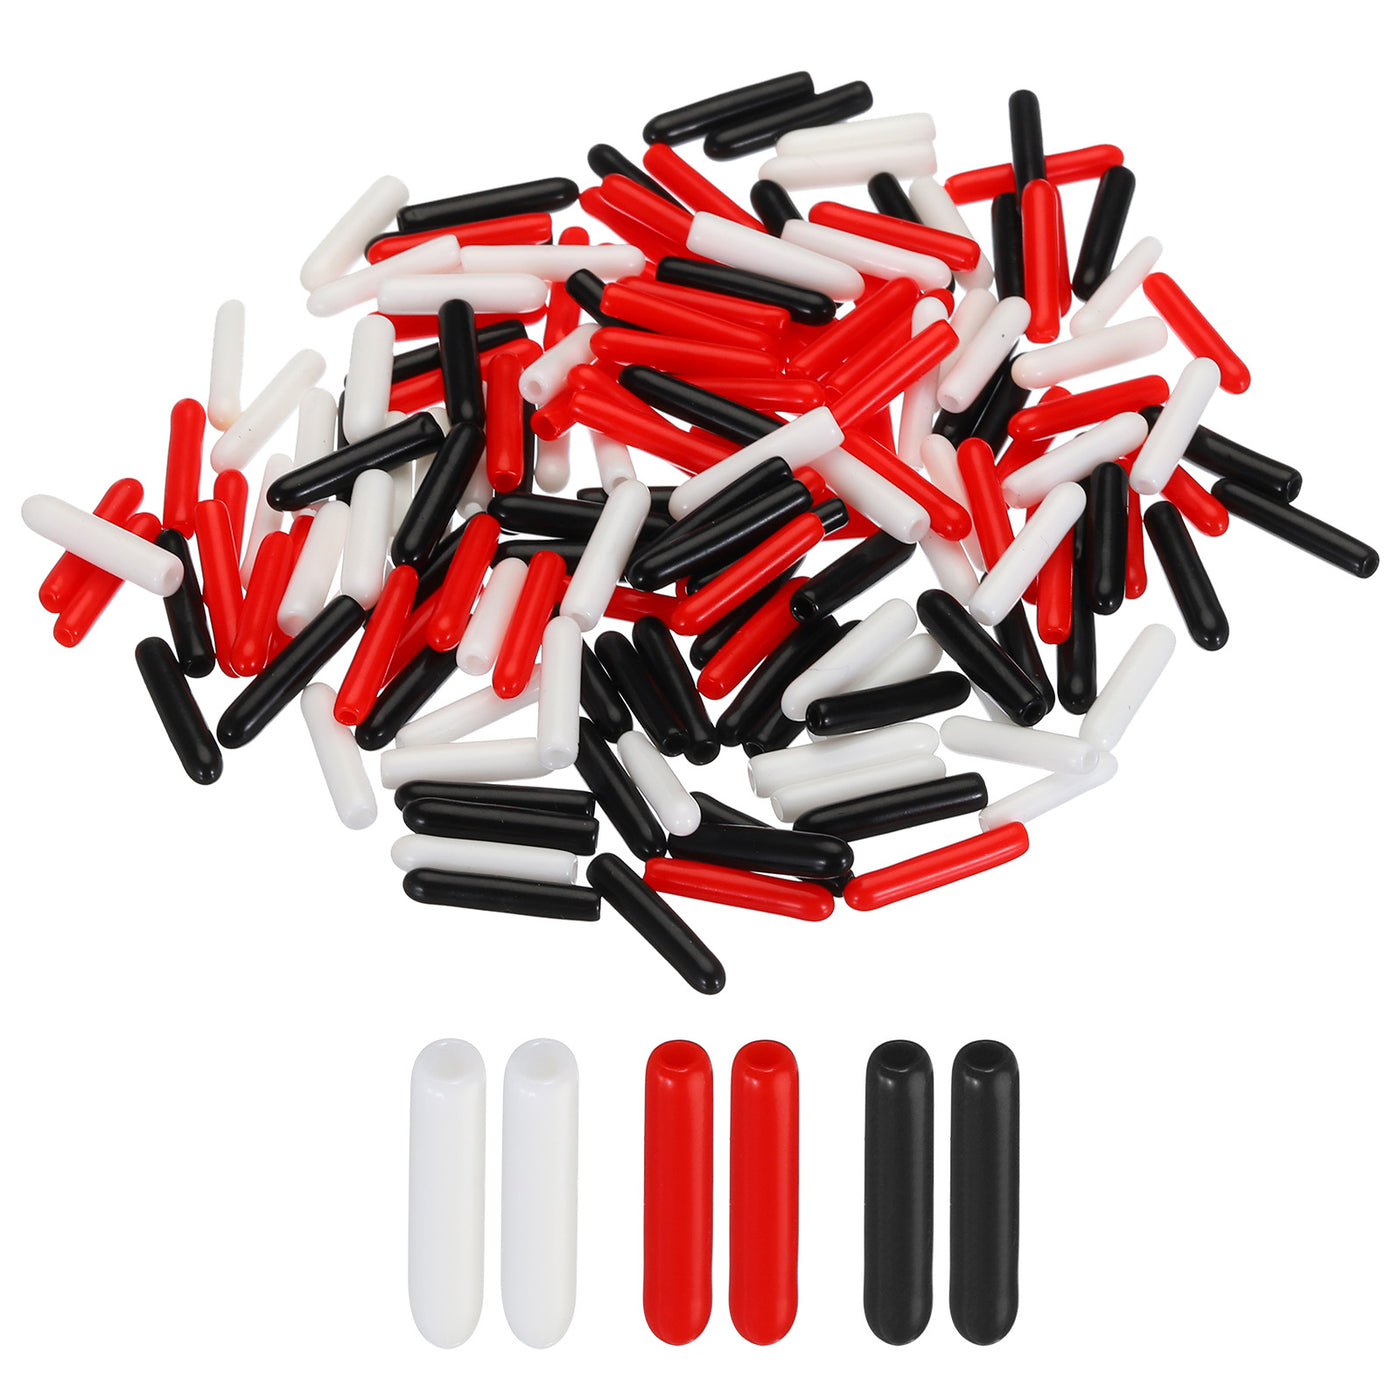 uxcell Uxcell 300pcs Rubber End Caps 1.5mm ID Vinyl Round Tube Bolt Cap Cover Screw Thread Protectors Black, Red, White